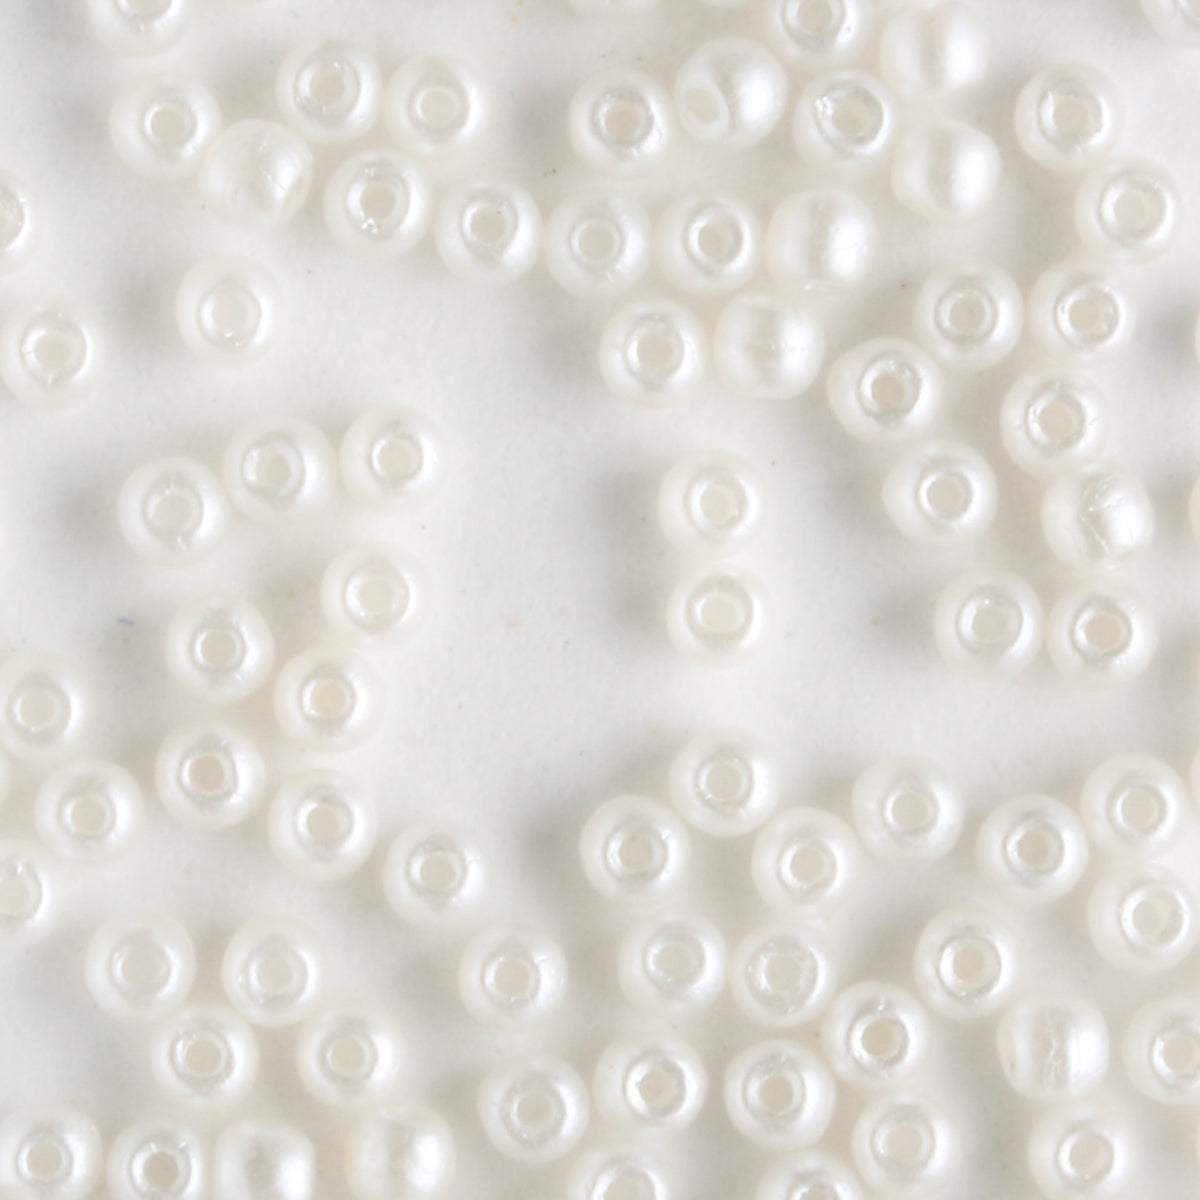 2mm Round Glass Pearls Snow - 100 beads